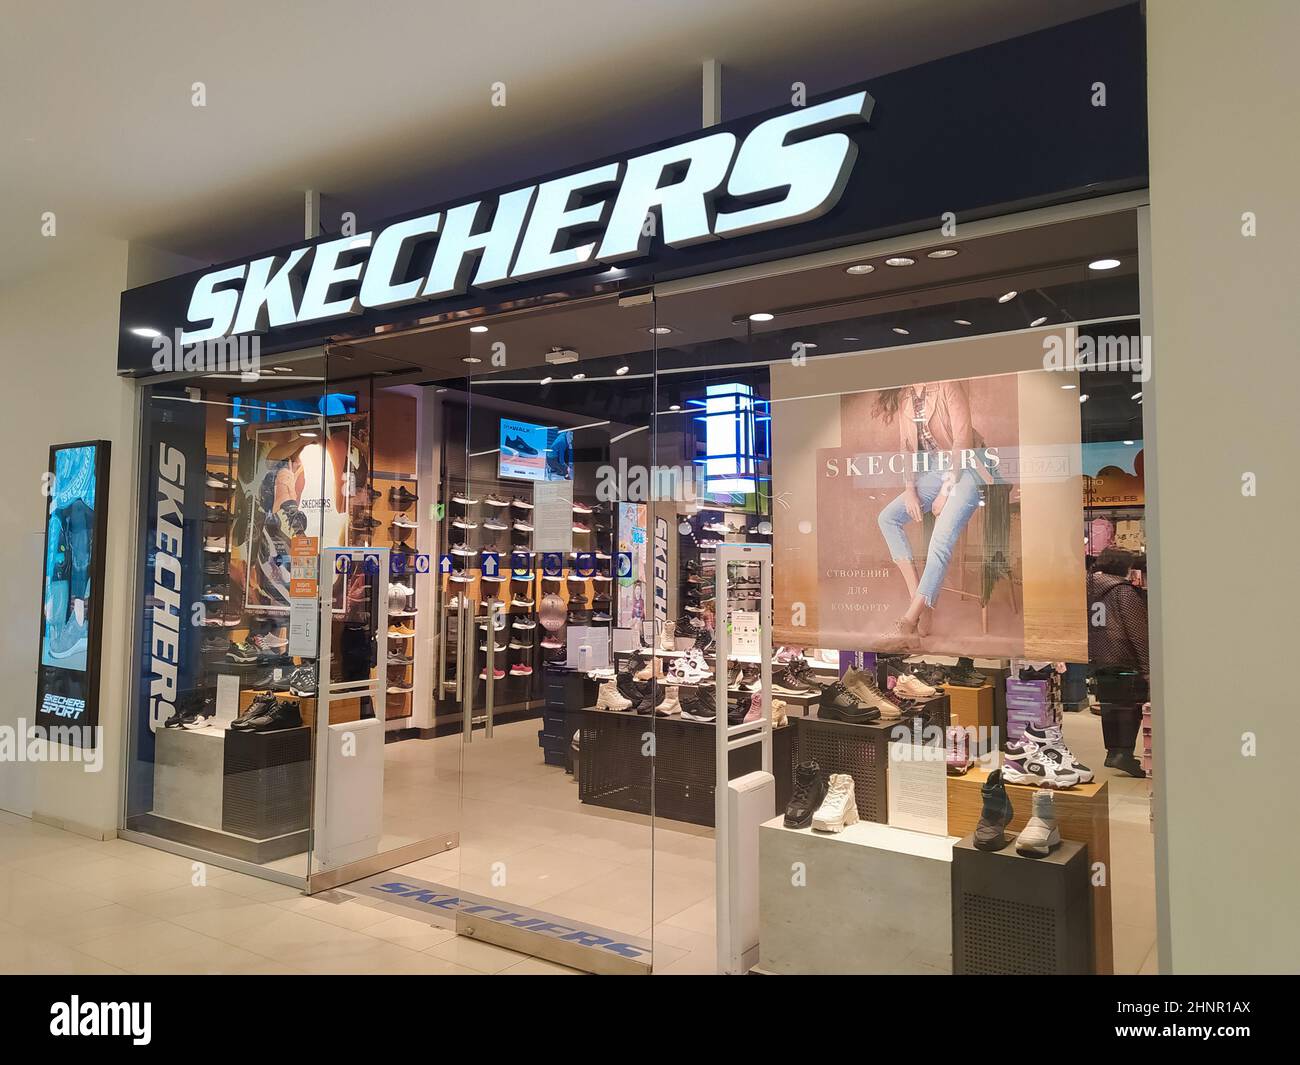 Skechers Shop Front High Resolution Stock Photography and Images - Alamy